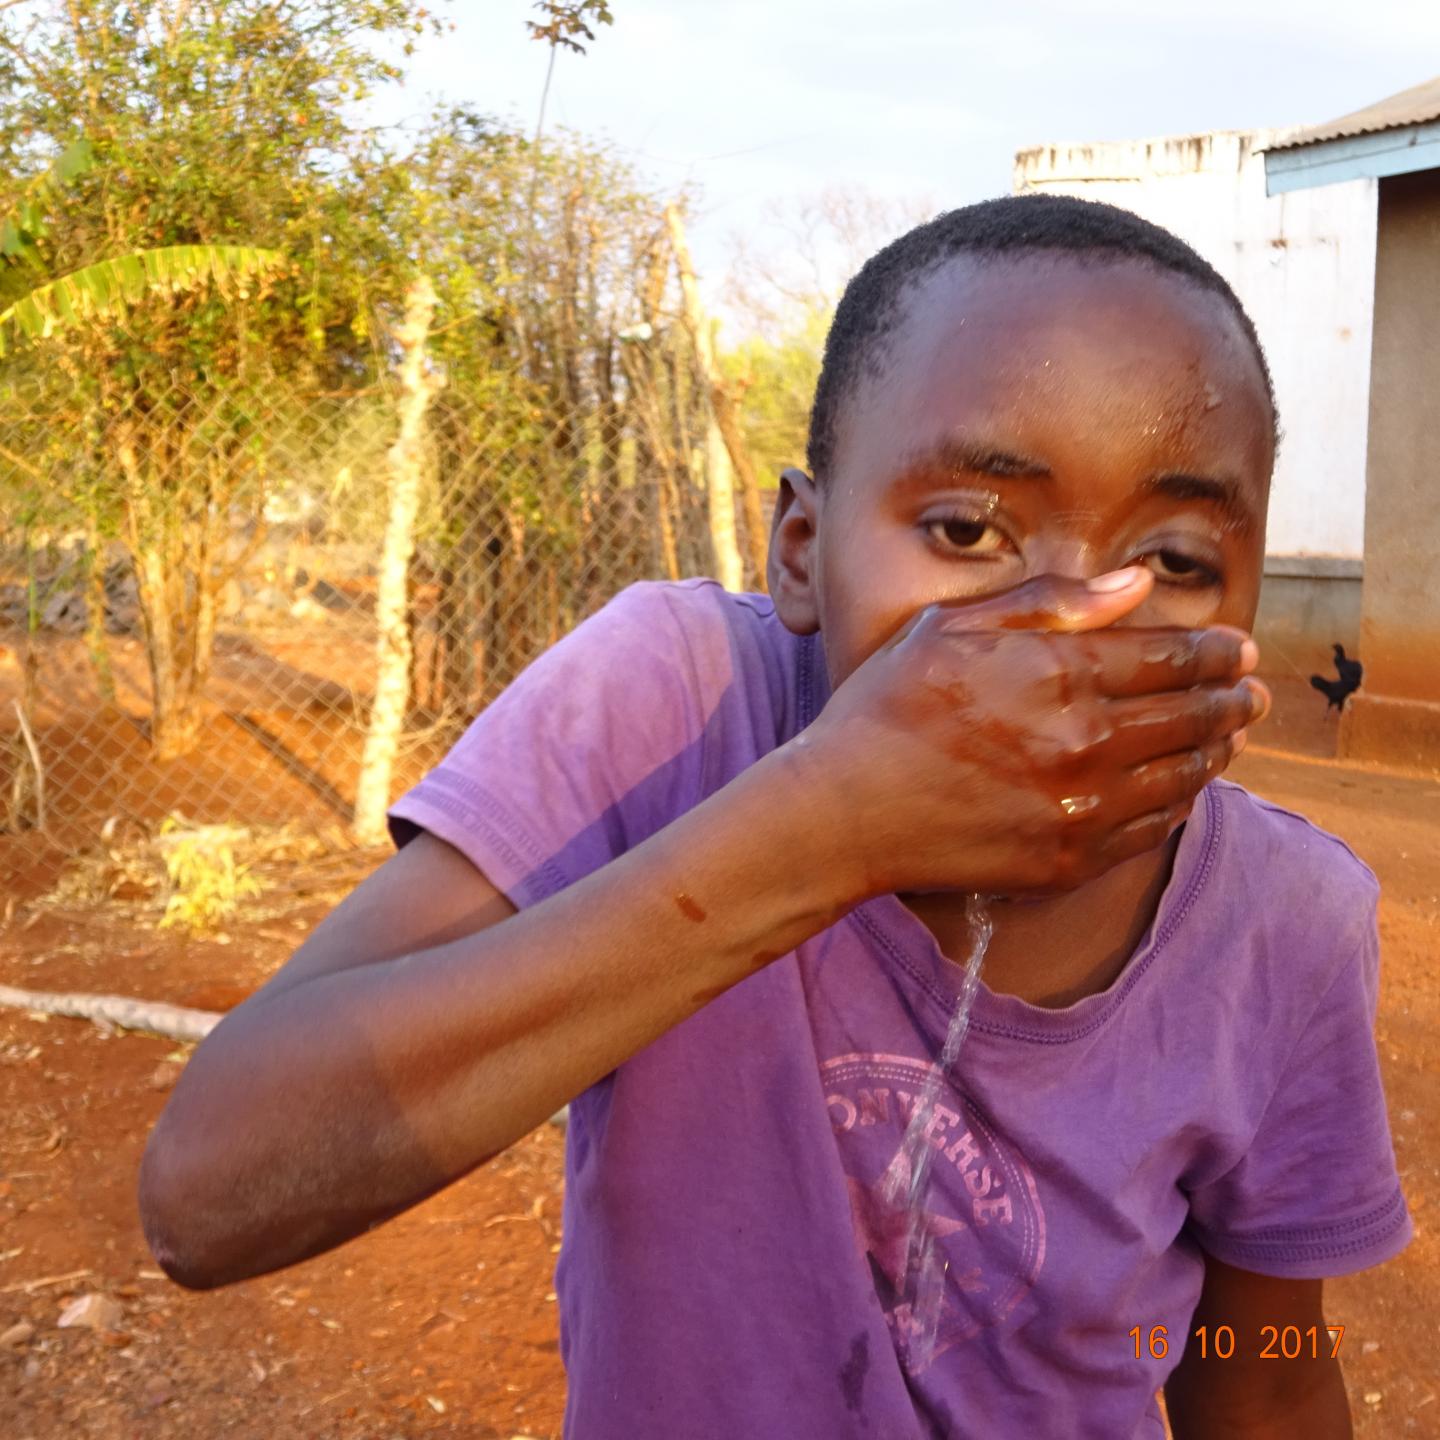 Judging a "Clean Face" for Trachoma